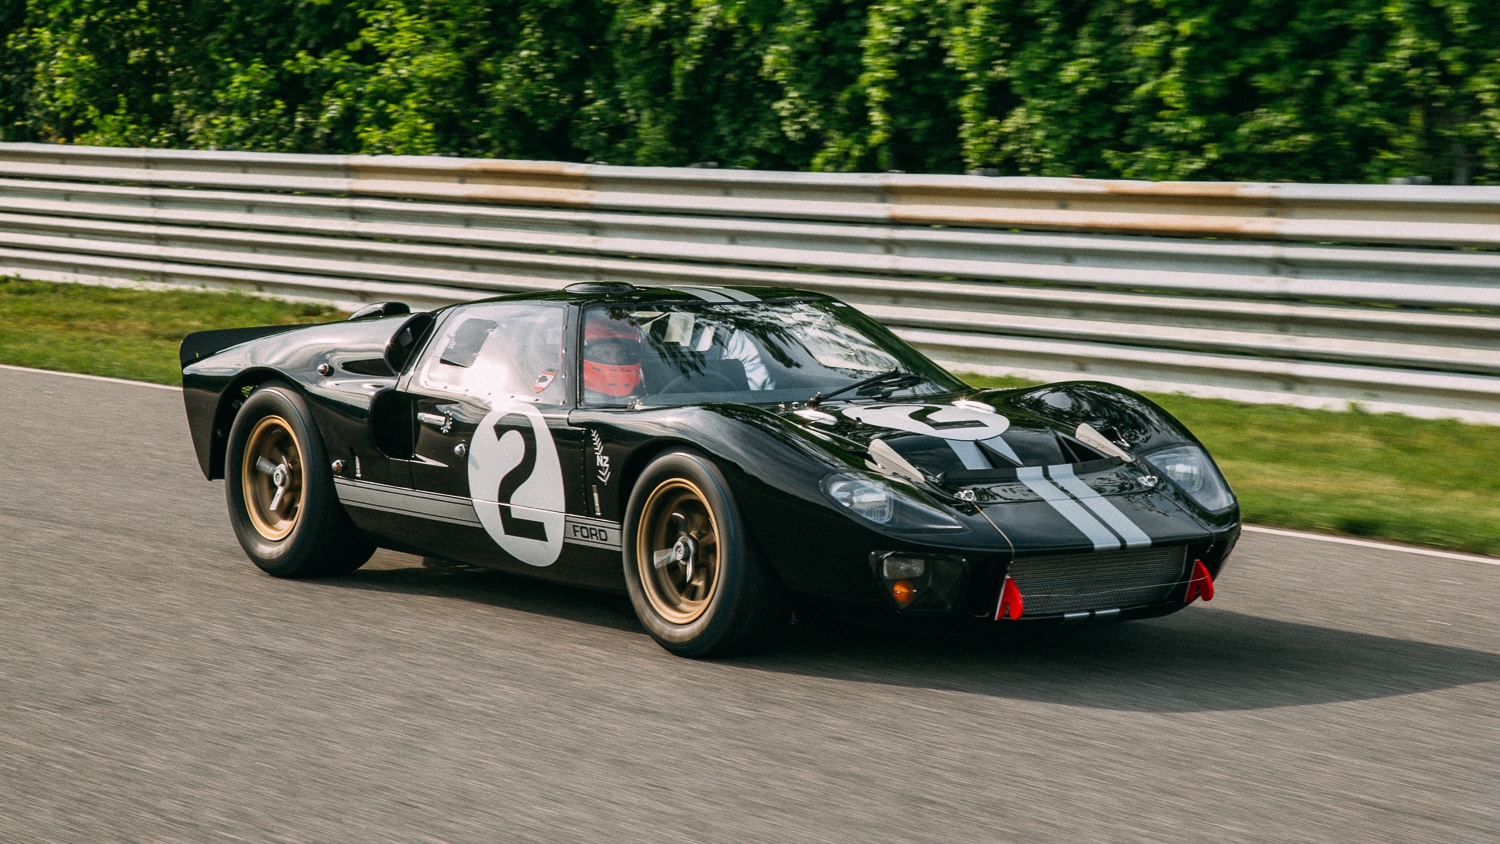 Greatest Le Mans Cars of all Time